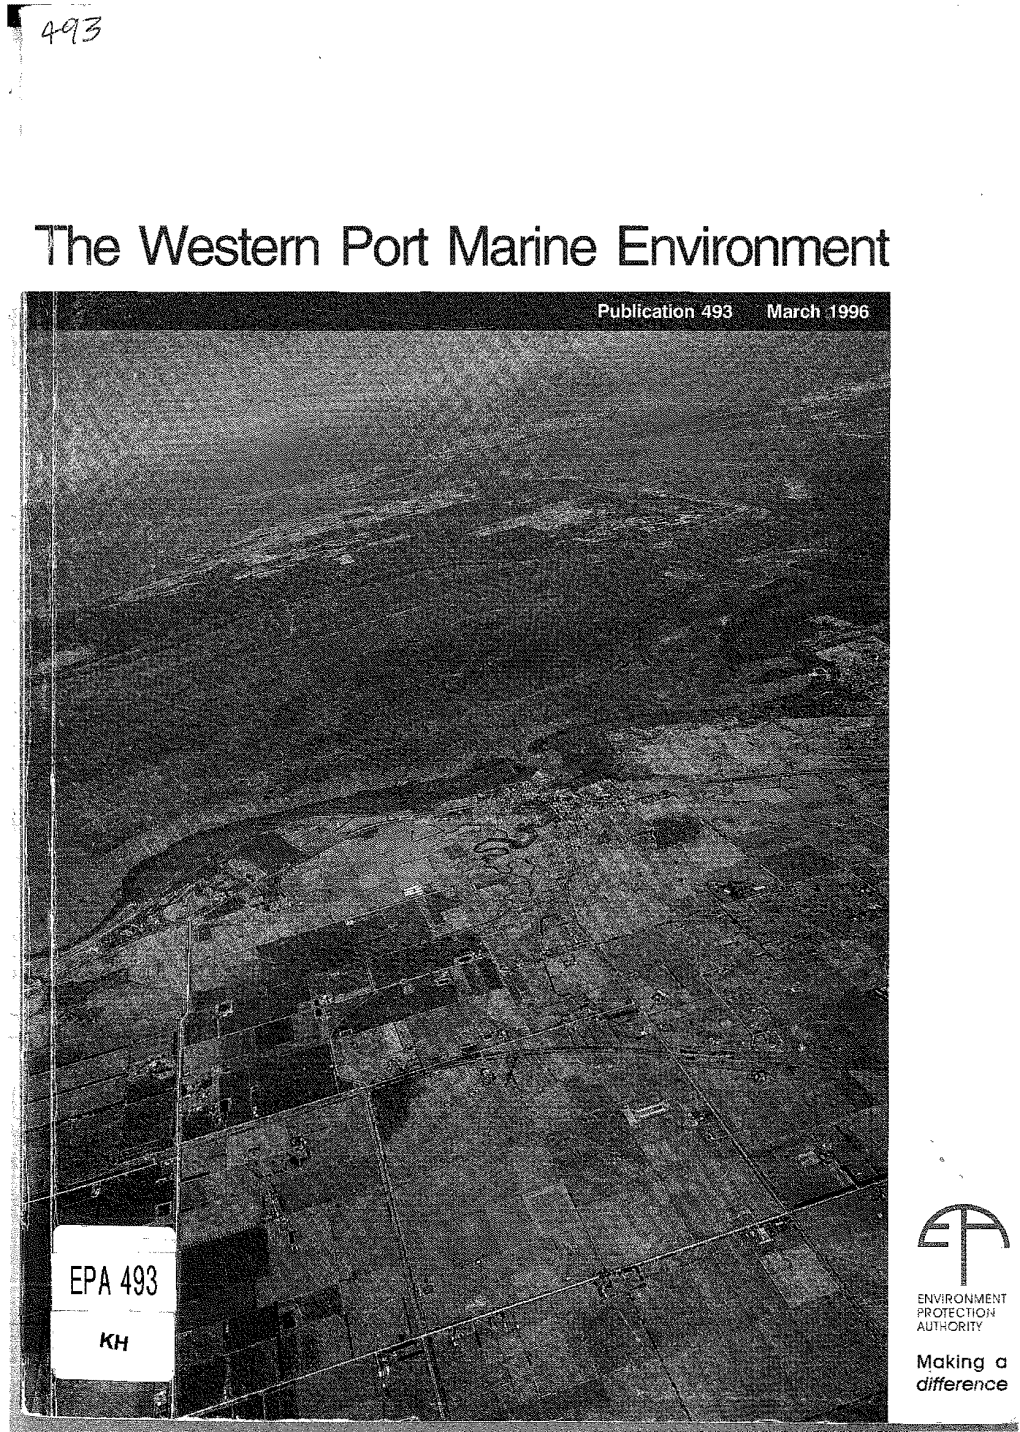 THE WESTERN PORT MARINE ENVIRONMENT Based on a Report to the Environment Protection Authority by Consulting Environmental Engineers